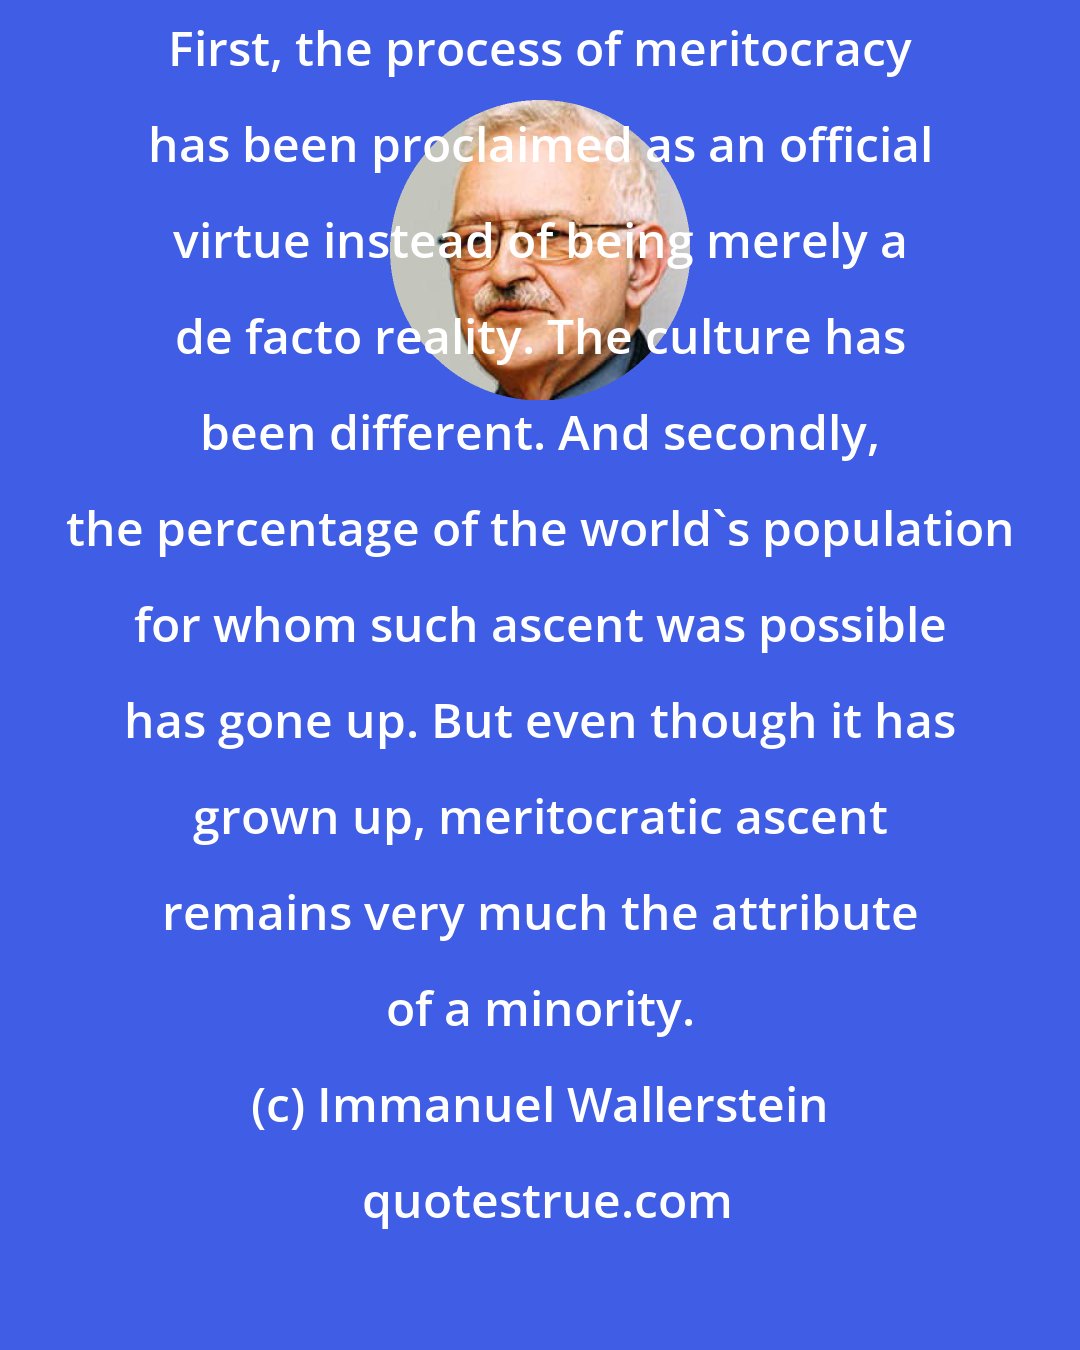 Immanuel Wallerstein: What is different in capitalist civilization has been two things. First, the process of meritocracy has been proclaimed as an official virtue instead of being merely a de facto reality. The culture has been different. And secondly, the percentage of the world's population for whom such ascent was possible has gone up. But even though it has grown up, meritocratic ascent remains very much the attribute of a minority.